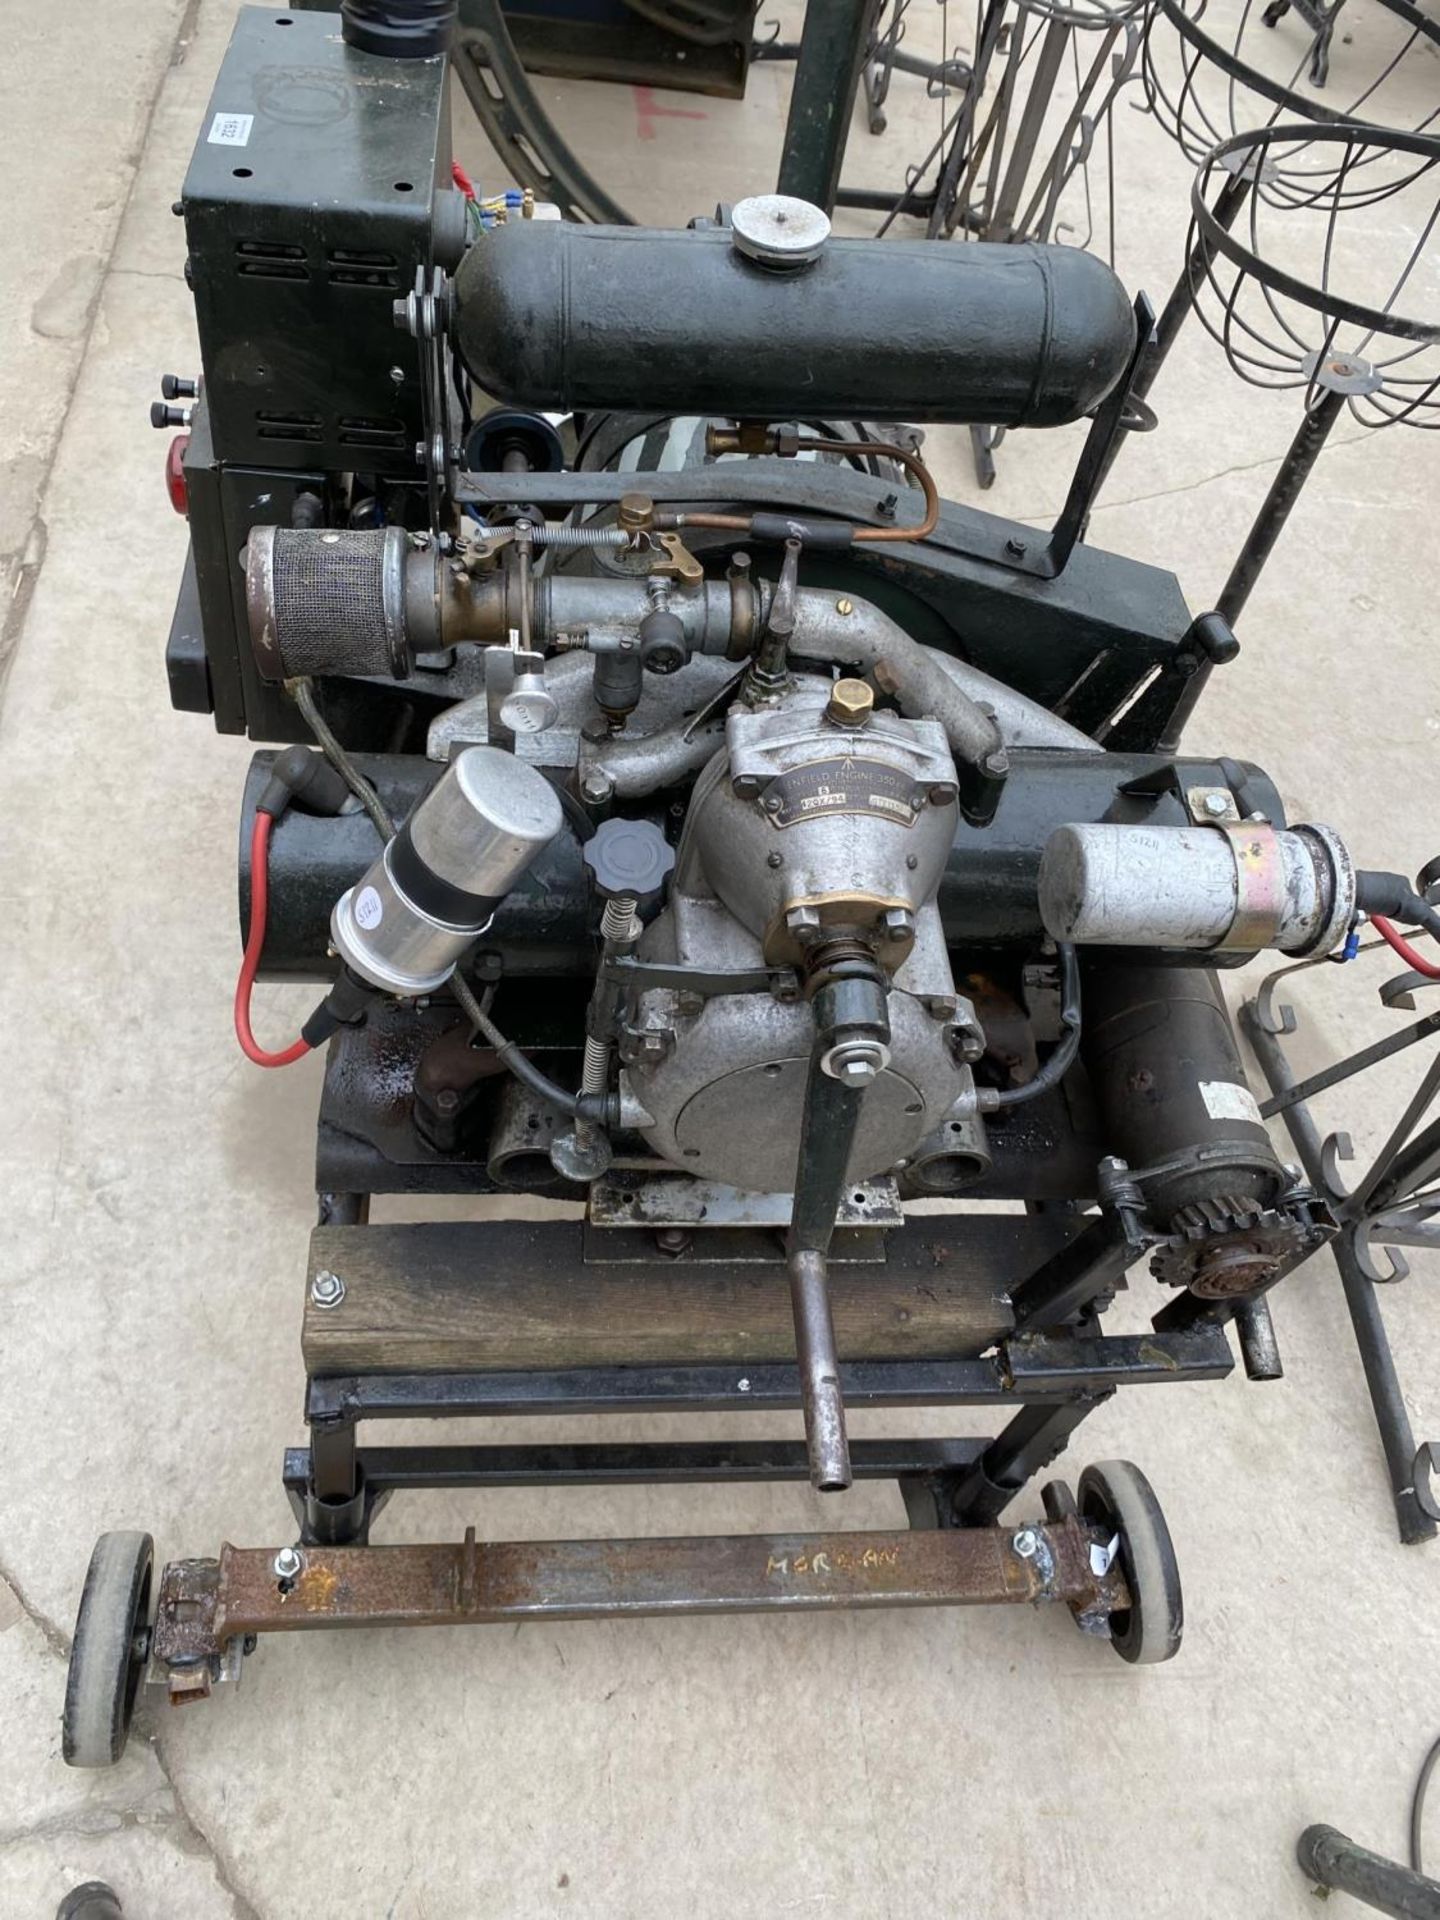 A CRANK HANDLE PETROL ENGINE GENERATOR - BELIEVED IN WORKING ORDER BUT NO WARRANTY GIVEN - Image 2 of 7